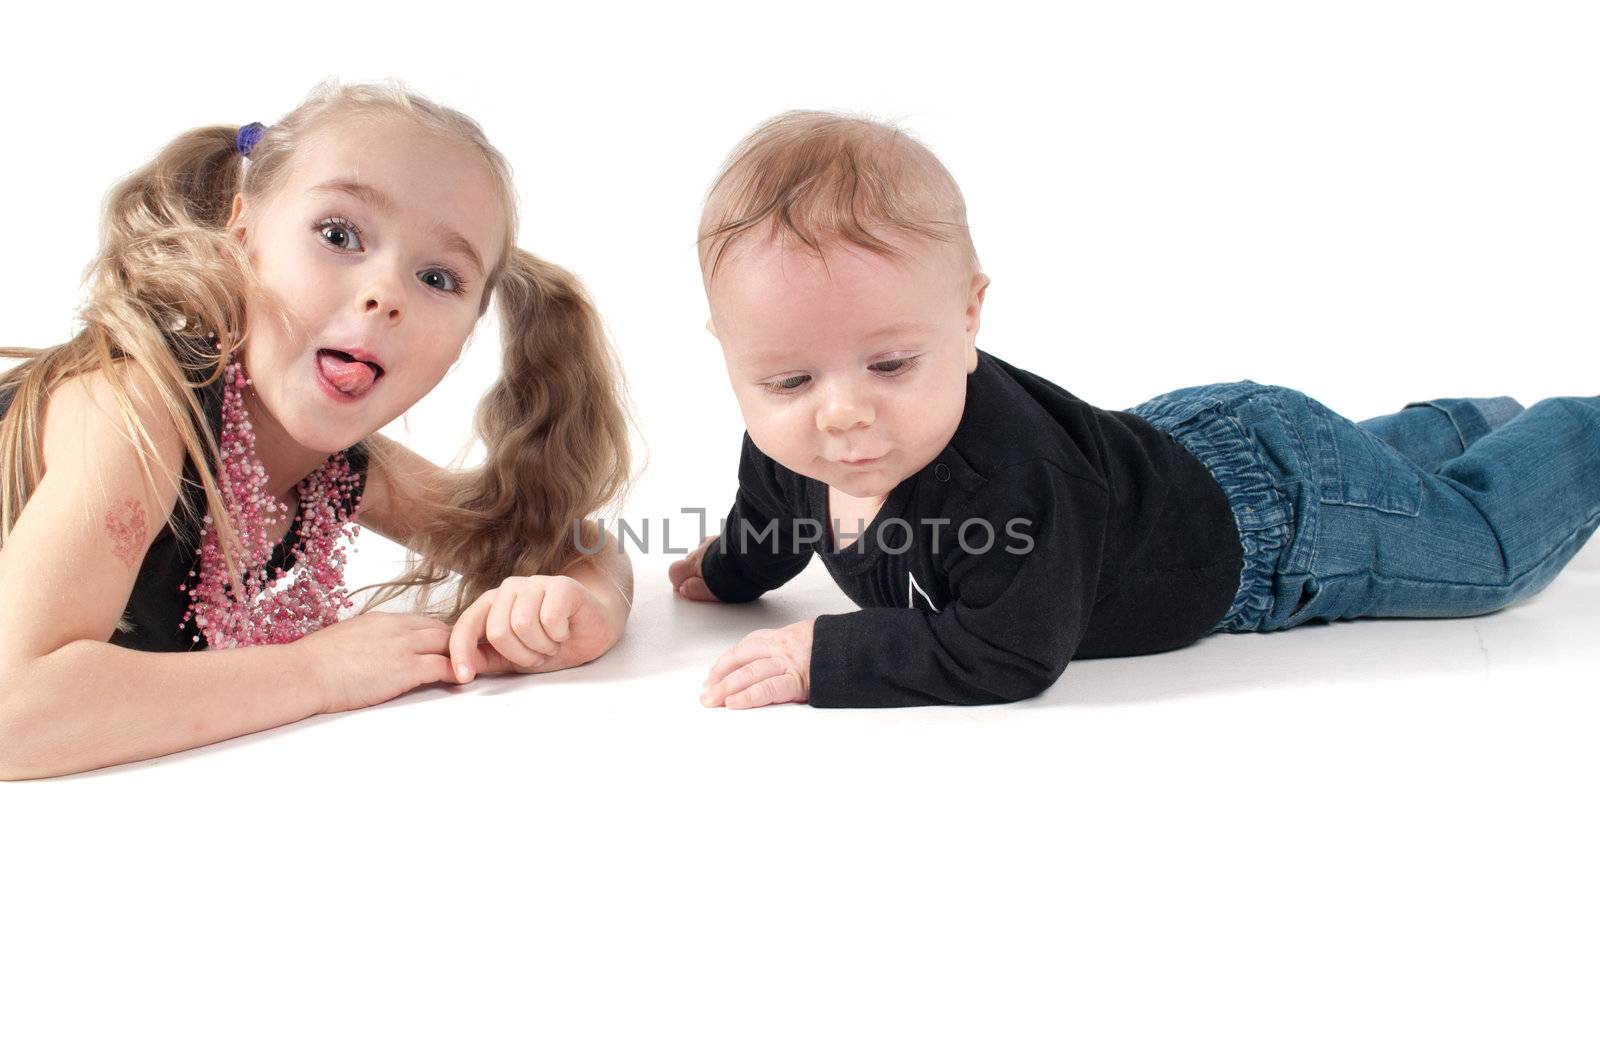 Newborn baby boy with sister showing tongue